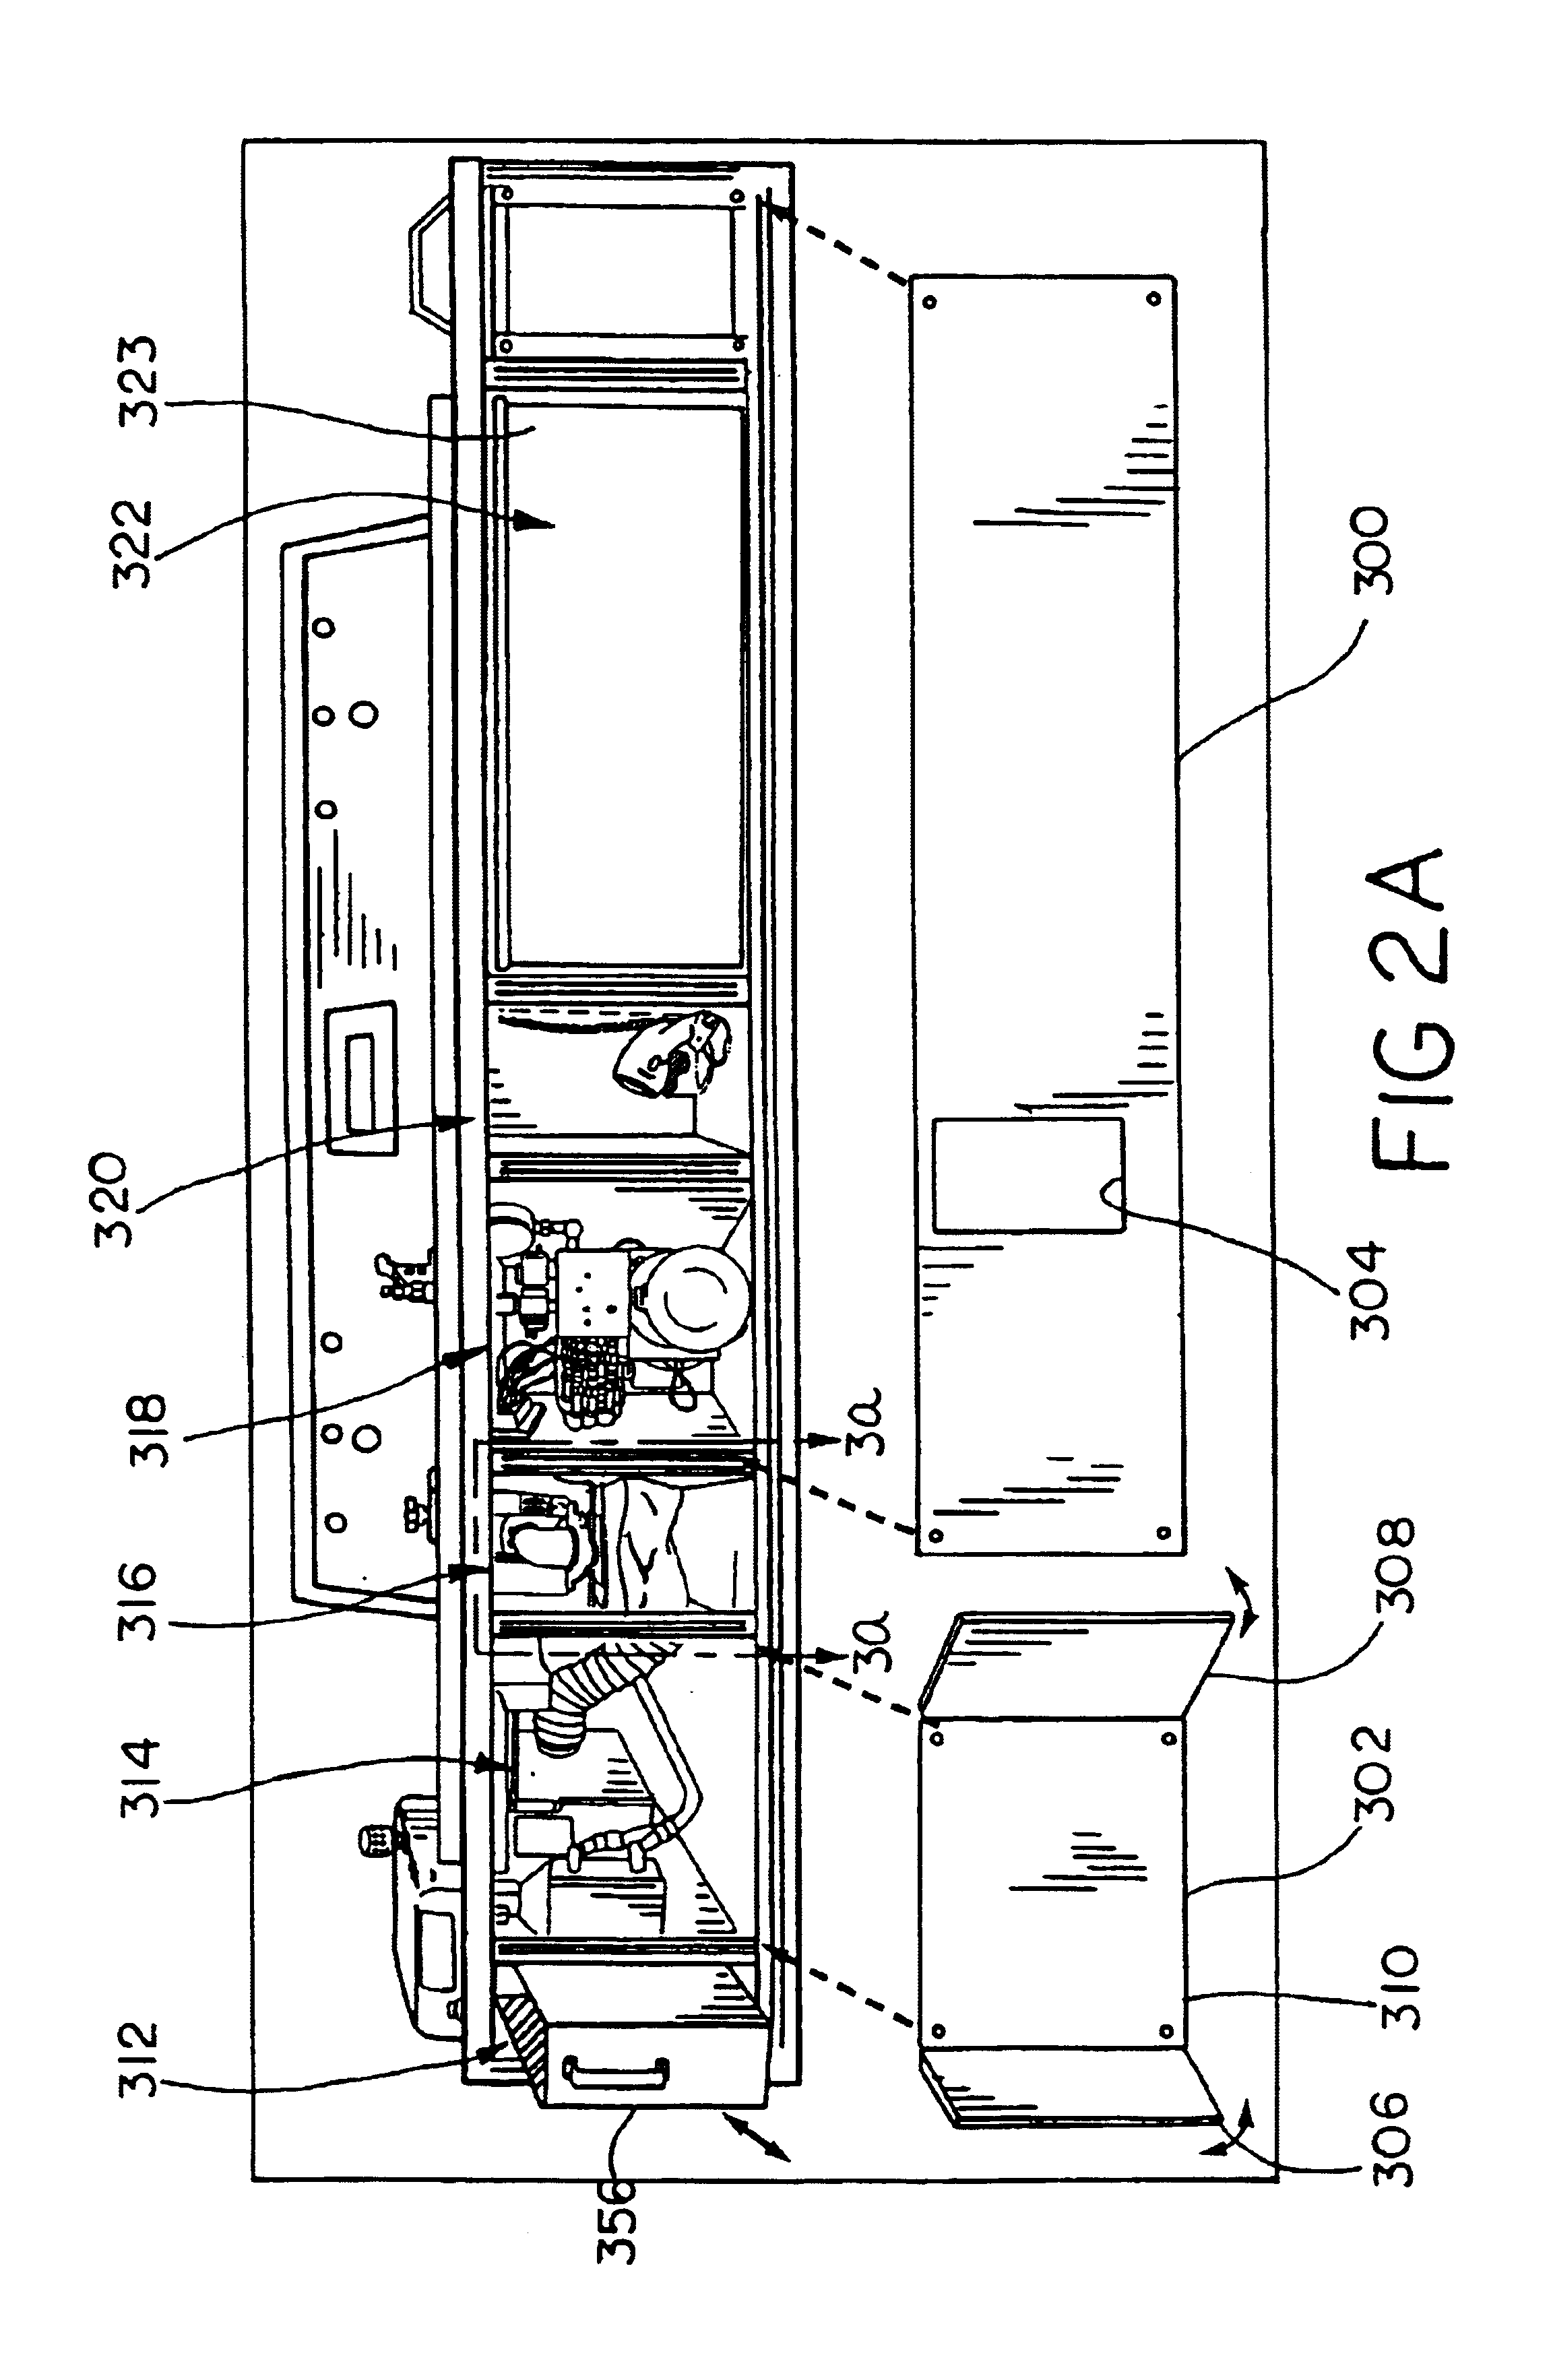 Adjustable blind cutting device